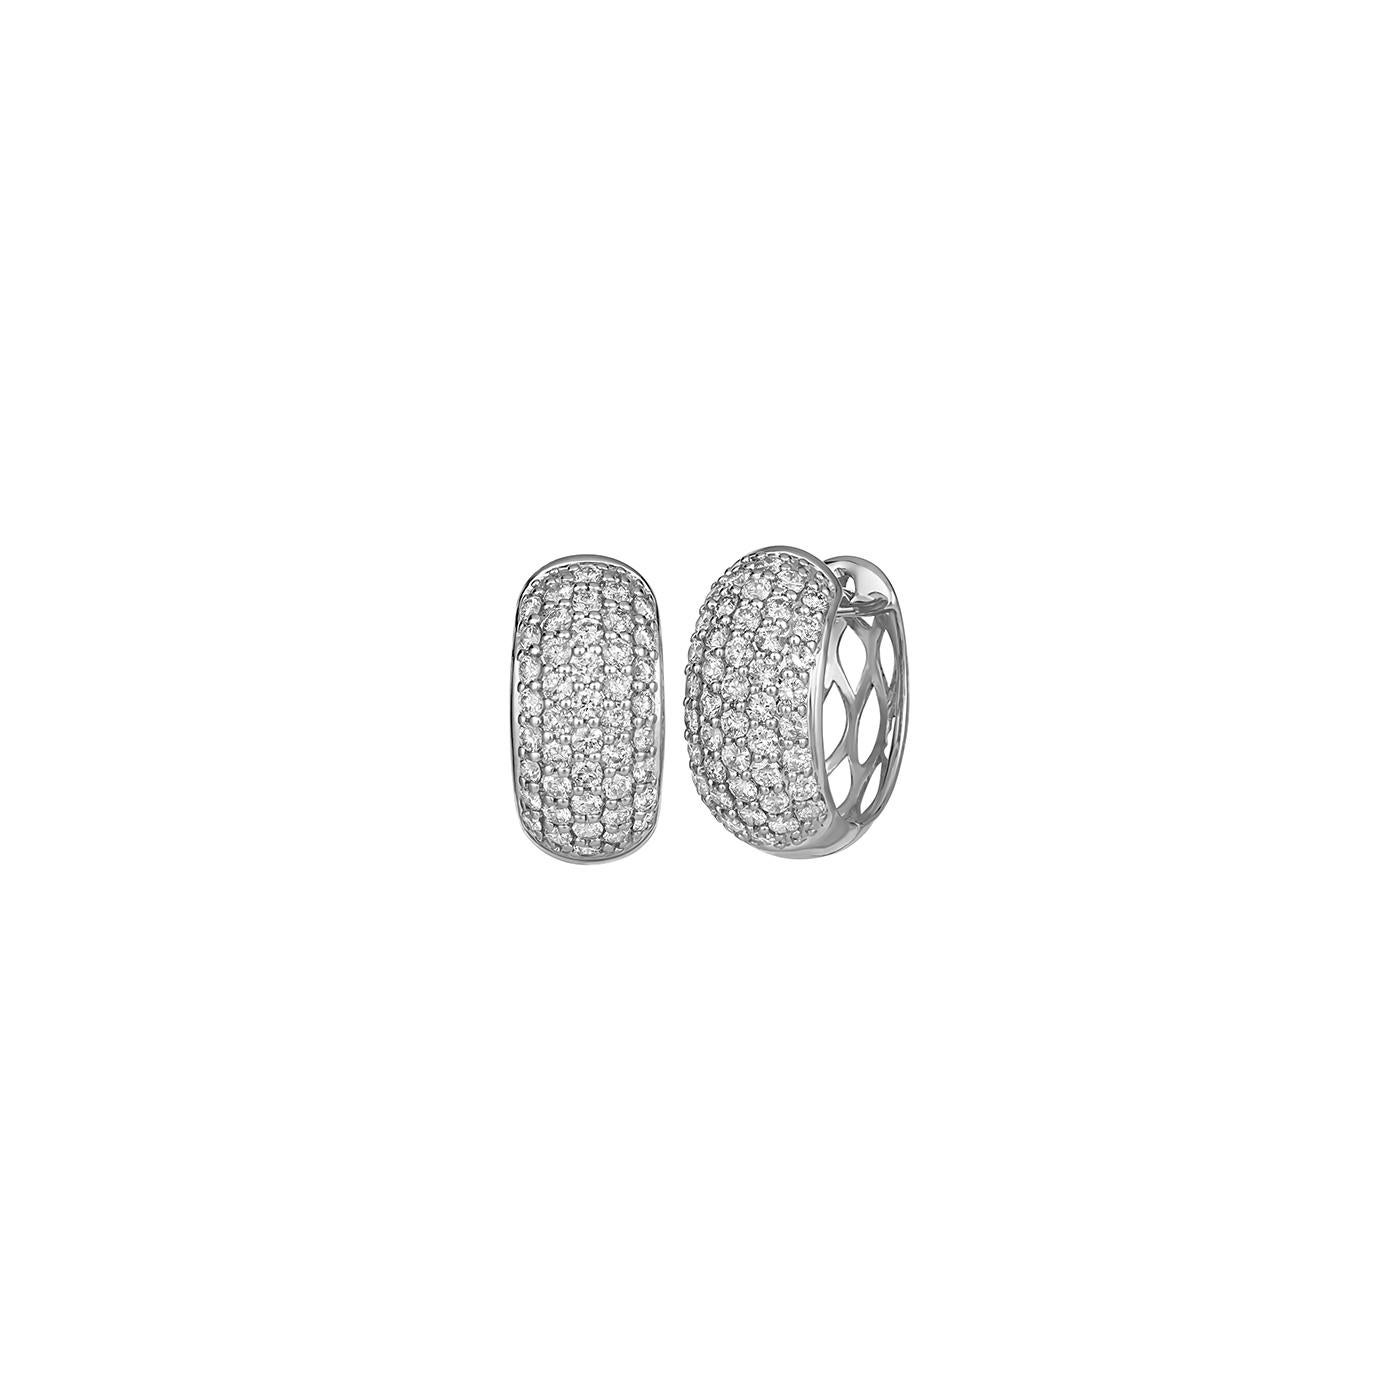 100% Natural, Not Enhanced in any way Round Cut Diamond Earrings
0.75CT
G-H 
SI  
14K White Gold,  2.87 grams, Prong
1/2